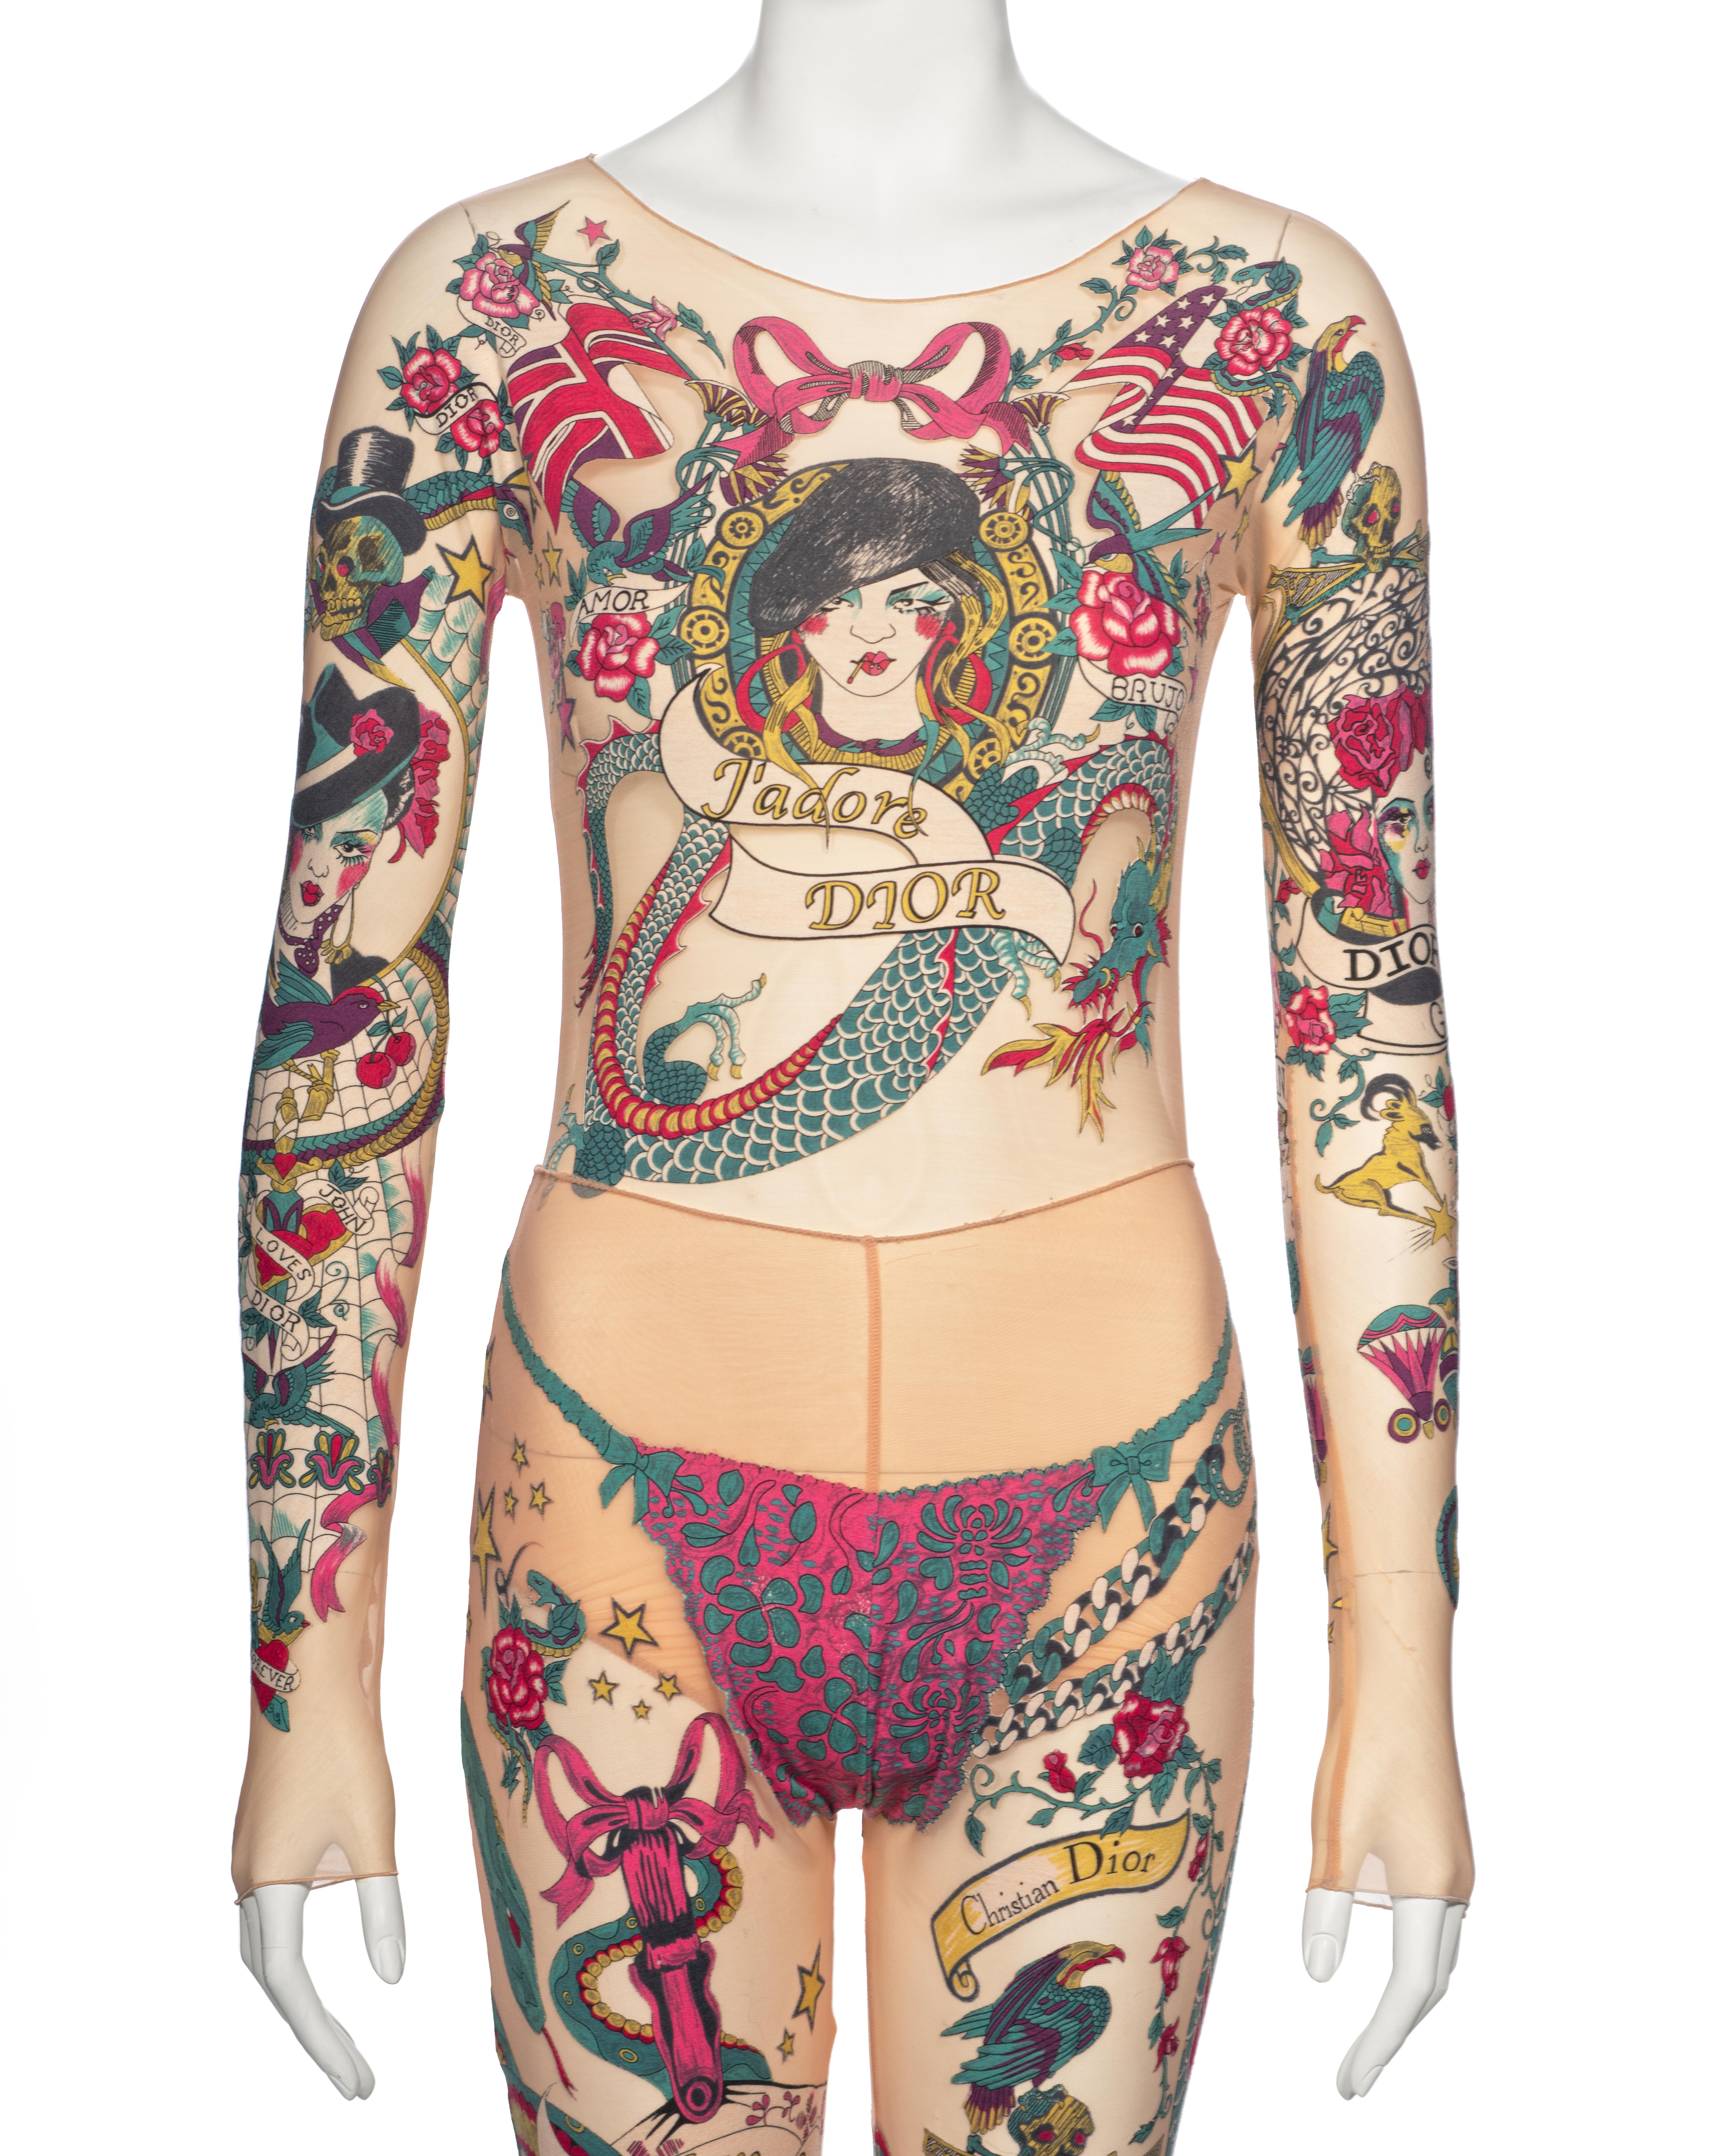 Christian Dior by John Galliano Tattoo Print Body, Leggings and Skirt, ss 2004 For Sale 1